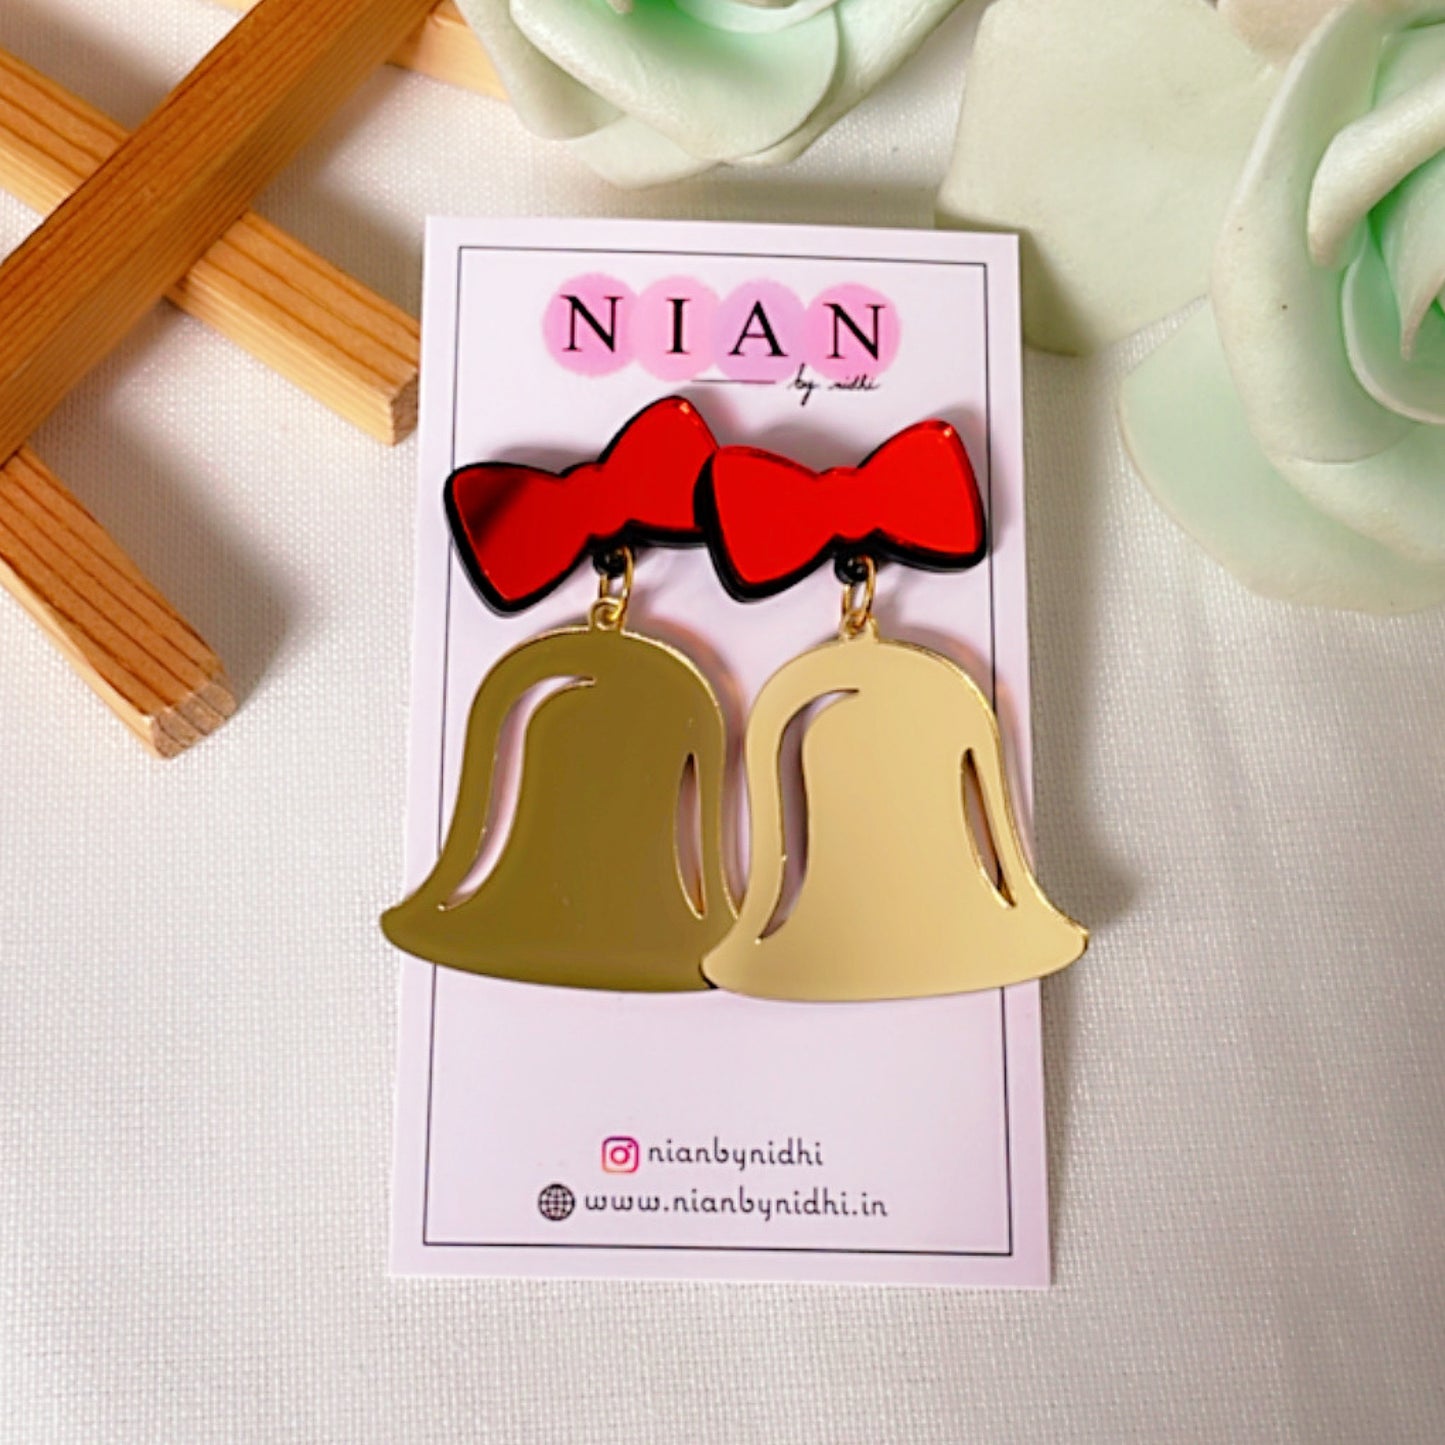 Jingle Bell Earrings - Red and Golden - Nian by Nidhi - placed in a white background